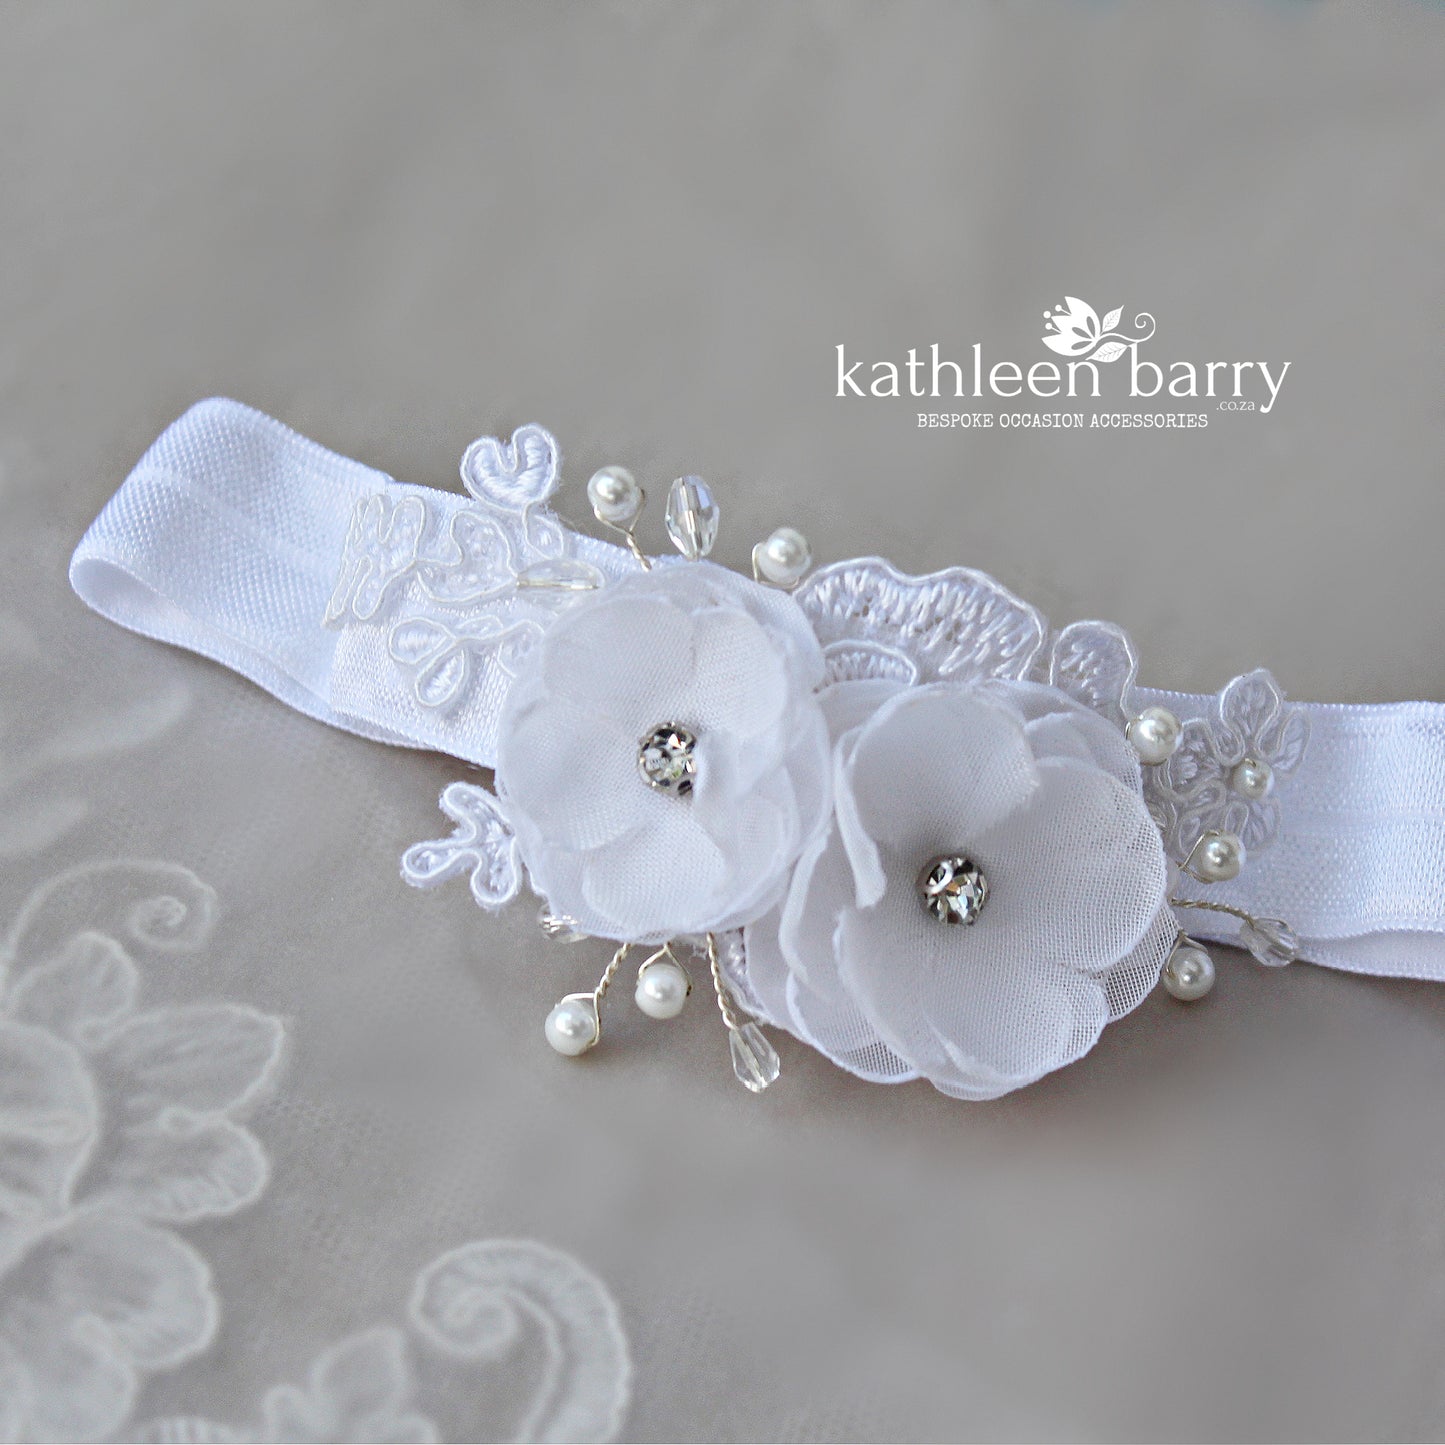 Elasticated floral lace headband for wedding baby or christening - assorted colors available